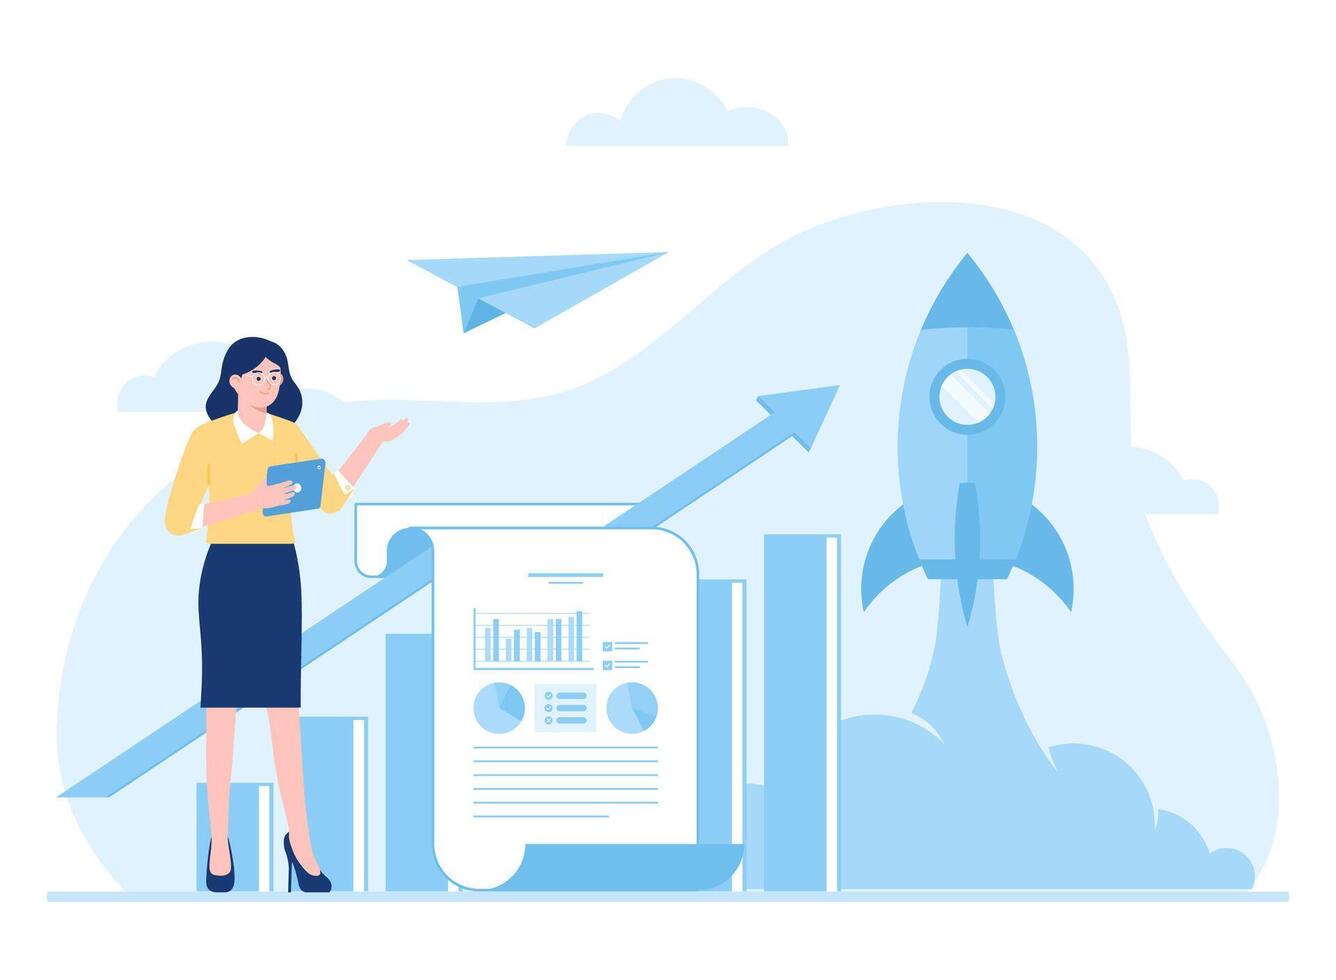 entrepreneurs working on launching a stock business concept flat illustration vector